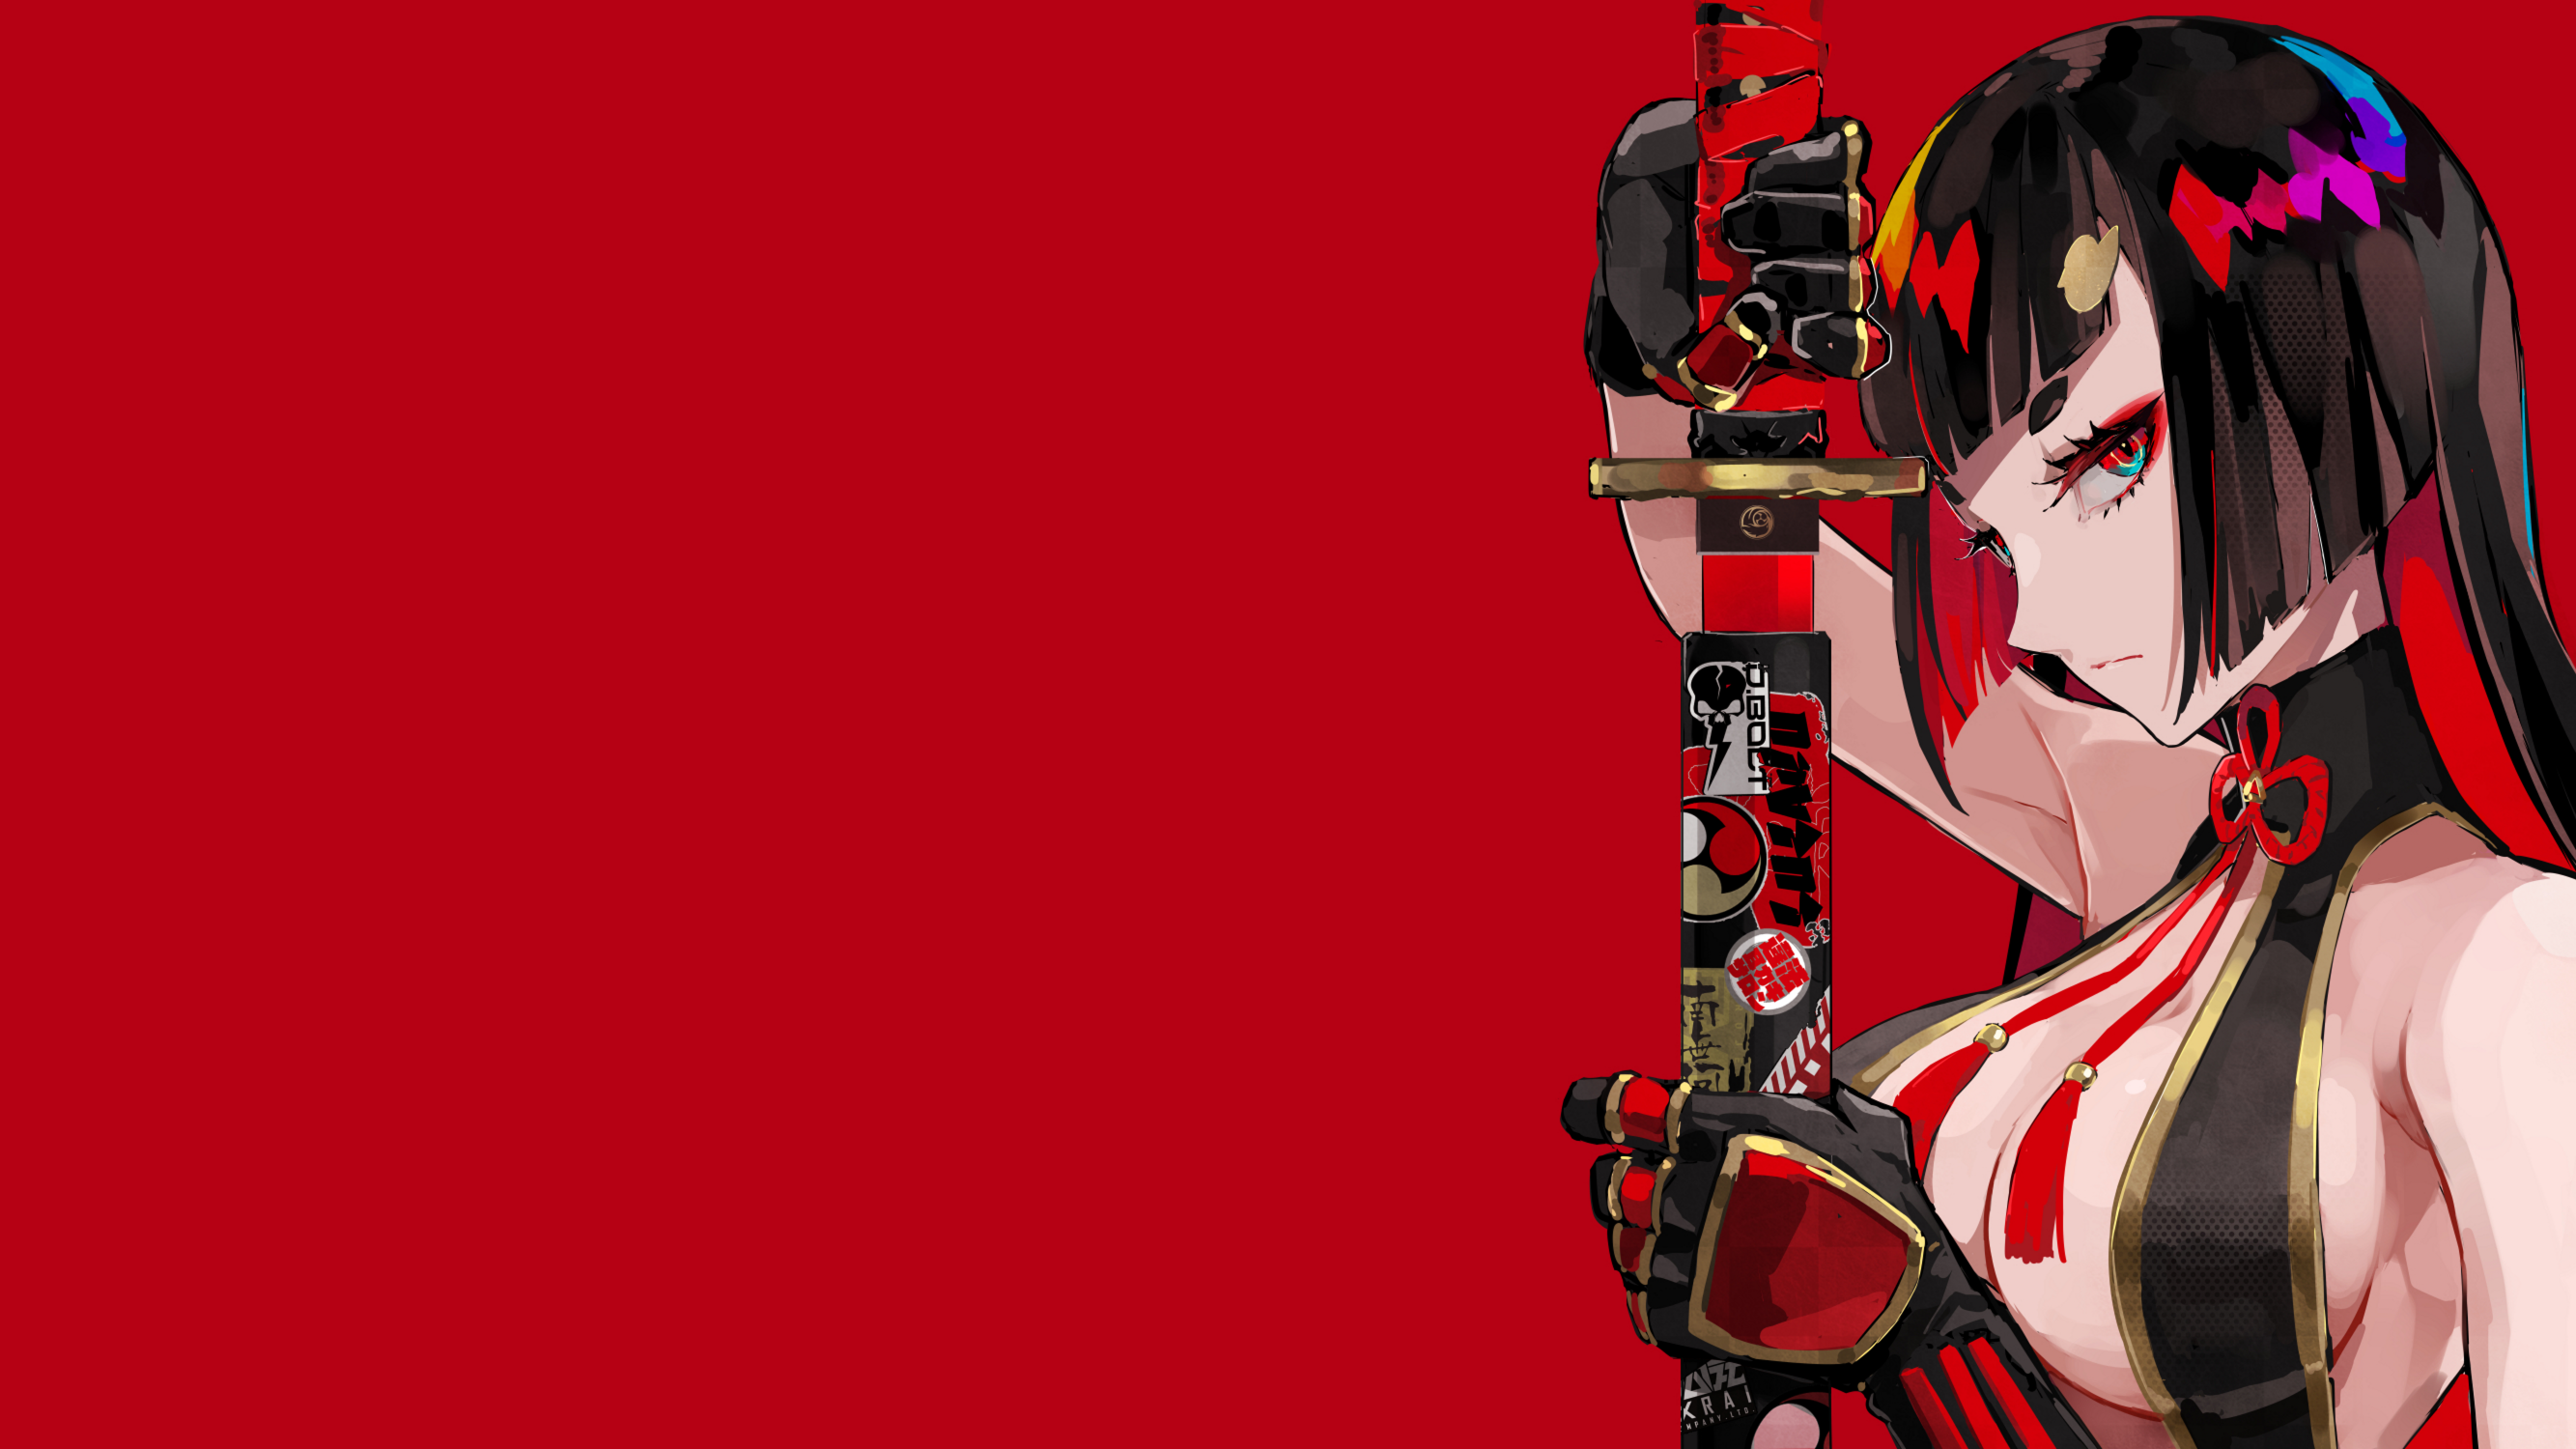 Anime 2667x1500 anime anime girls original characters looking at viewer dark hair colorful profile gloves katana weapon cleavage sideboob red background simple background artwork digital art drawing 2D illustration LAM bangs cheongsam